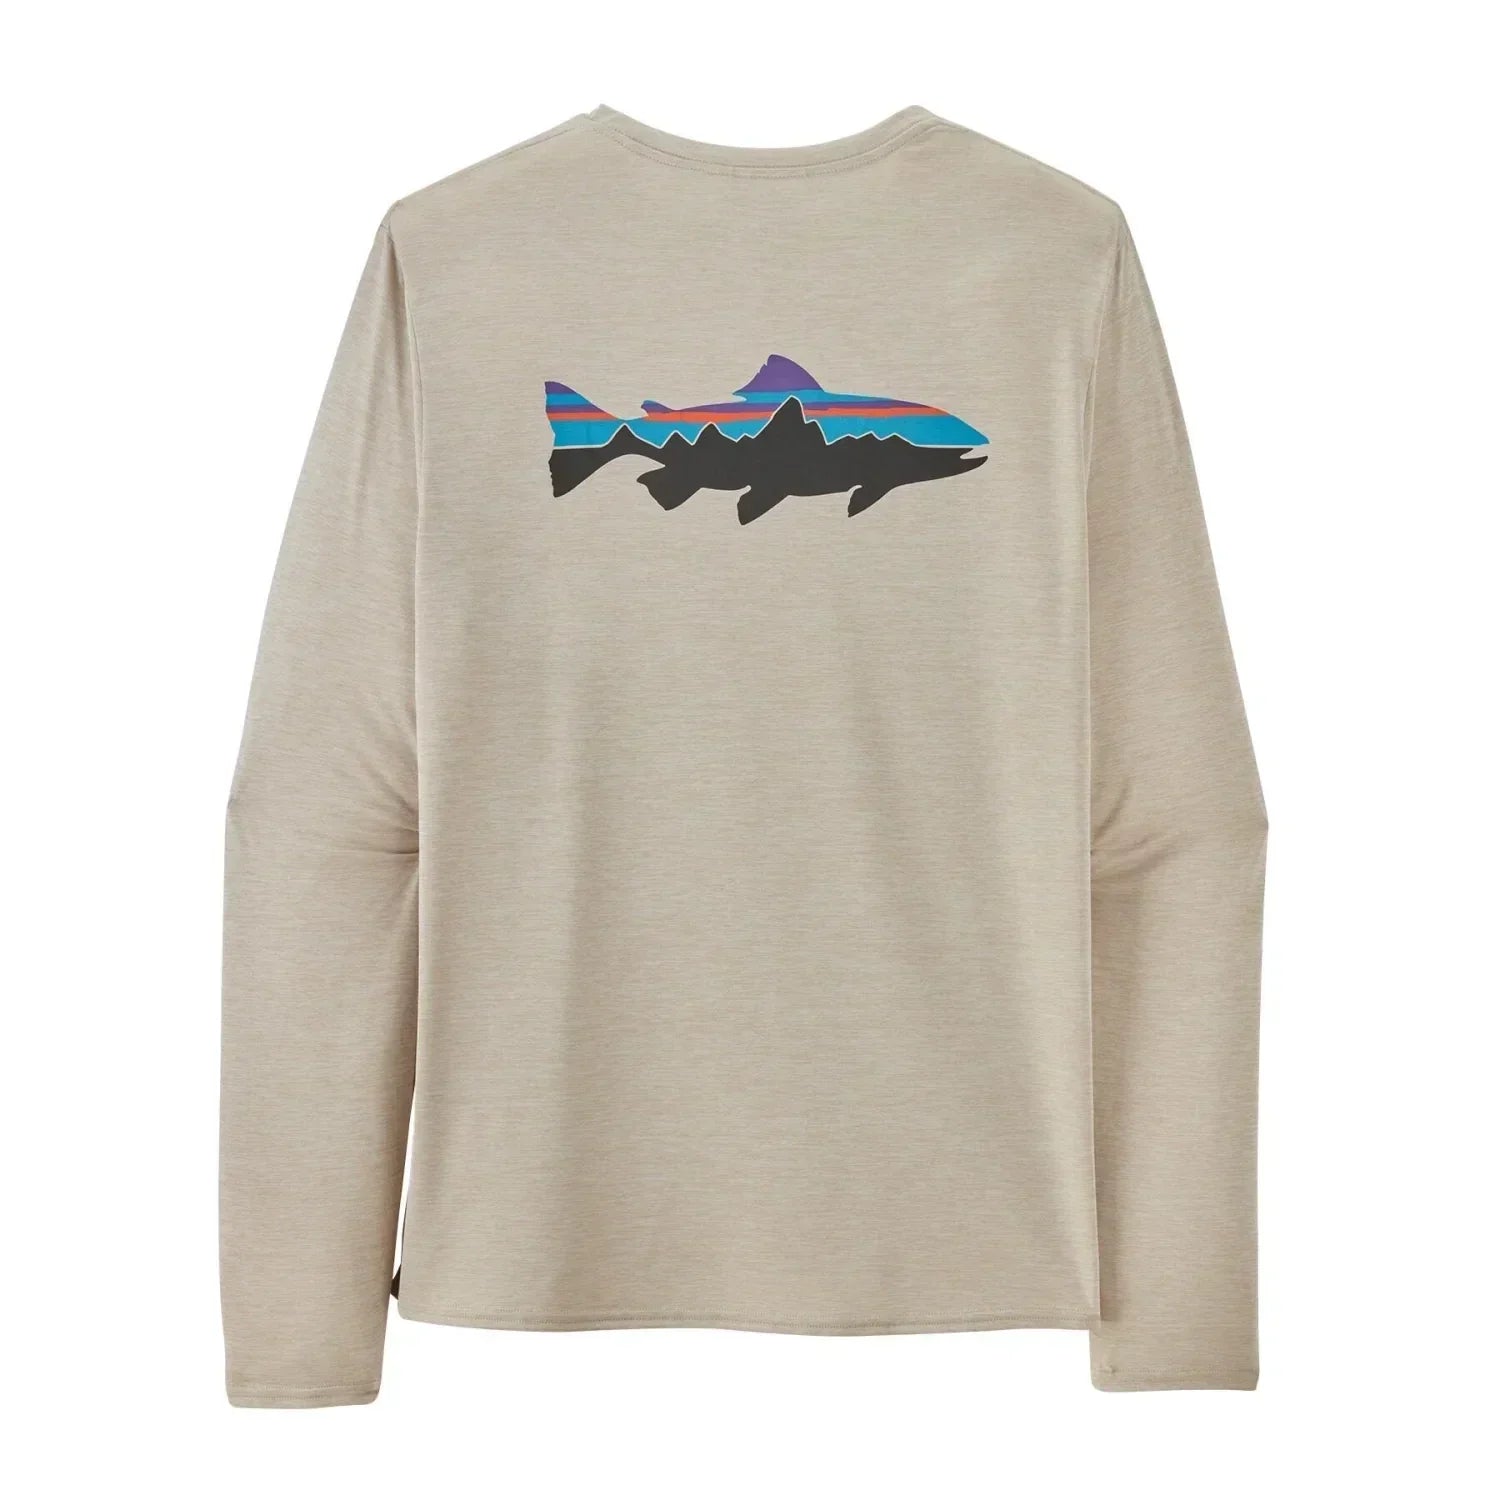 Patagonia 05. M. SPORTSWEAR - M. LS SHIRTS Men's Long Sleeve Capilene Cool Daily Graphic Shirt - Waters FPMX FITZ ROY TROUT|PUMICE X-DYE